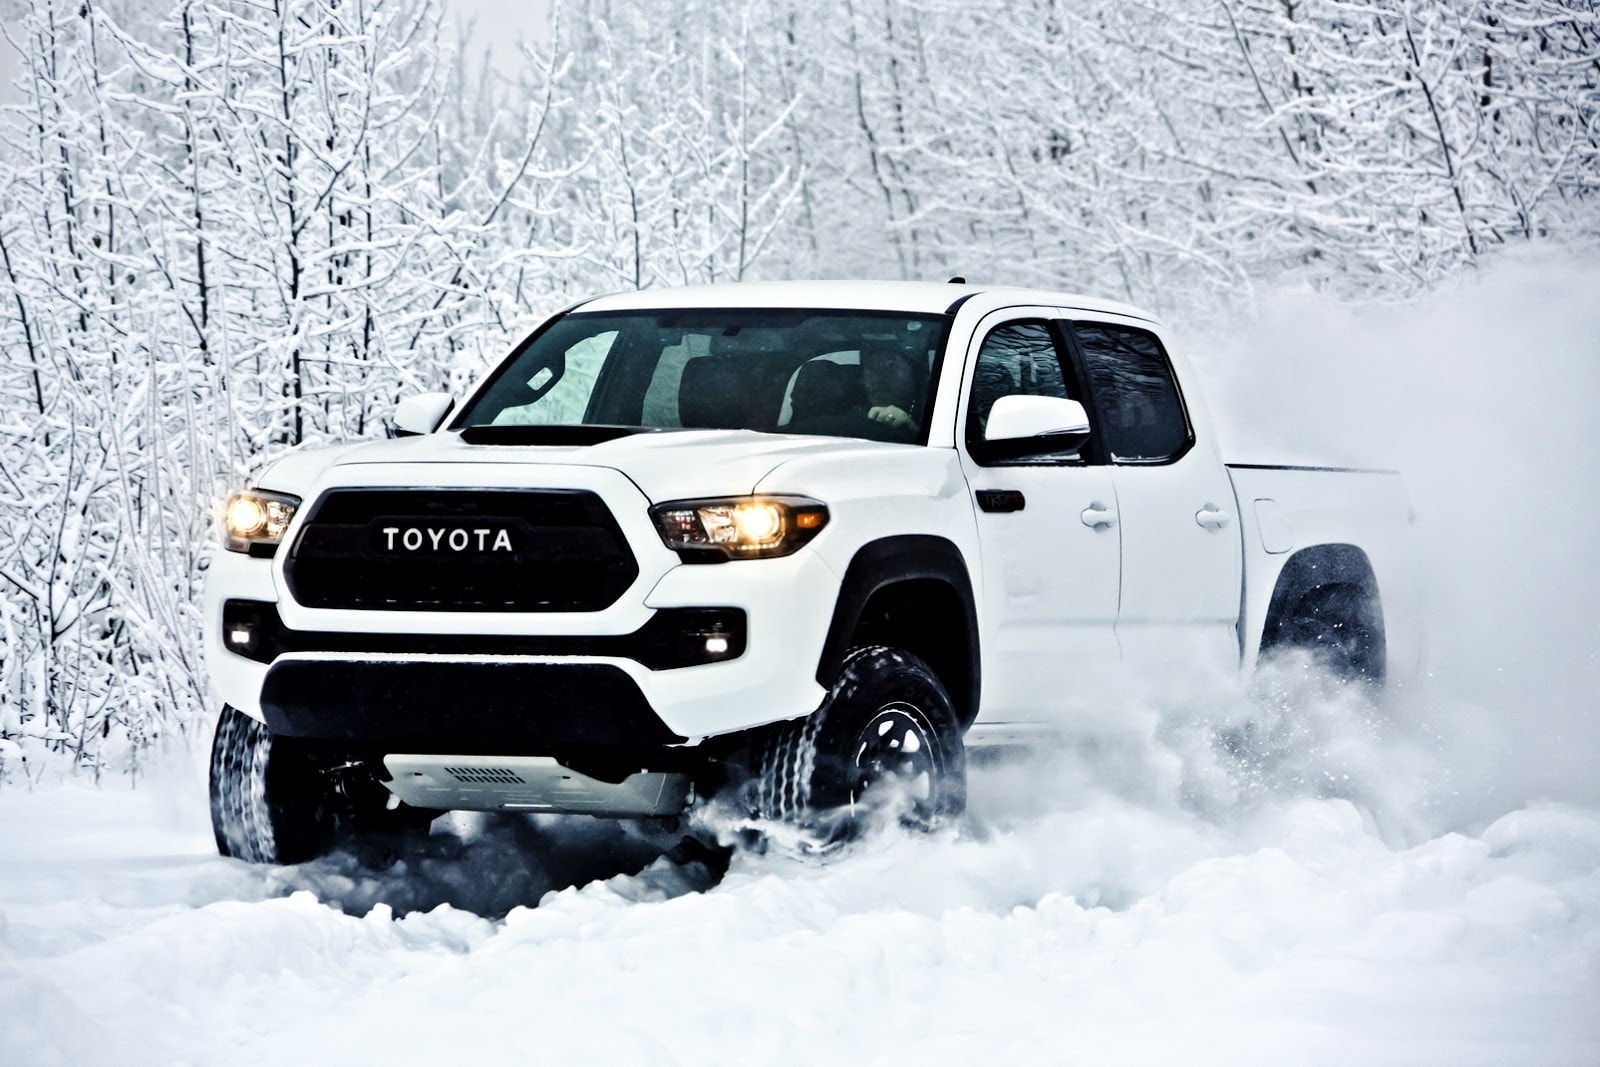 2017 Toyota Tacoma TRD Pro Is a Small but Extreme Off-Road Pickup